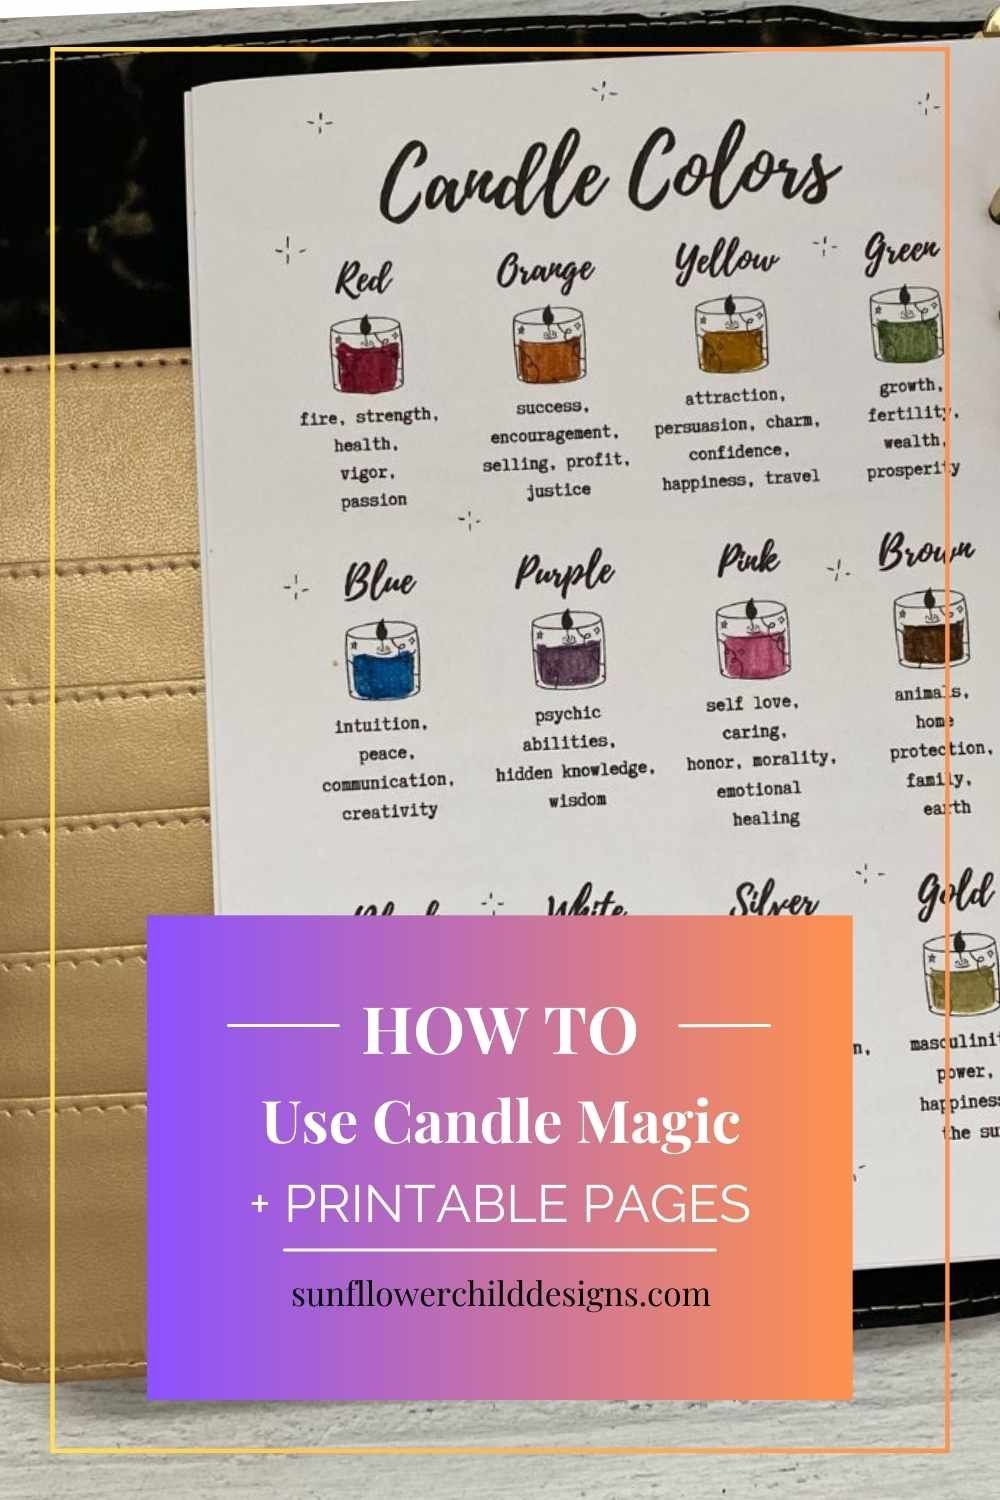 "Unlock the Power of Candle Magic: A Beginner's Guide + Exclusive Printable Pages!"